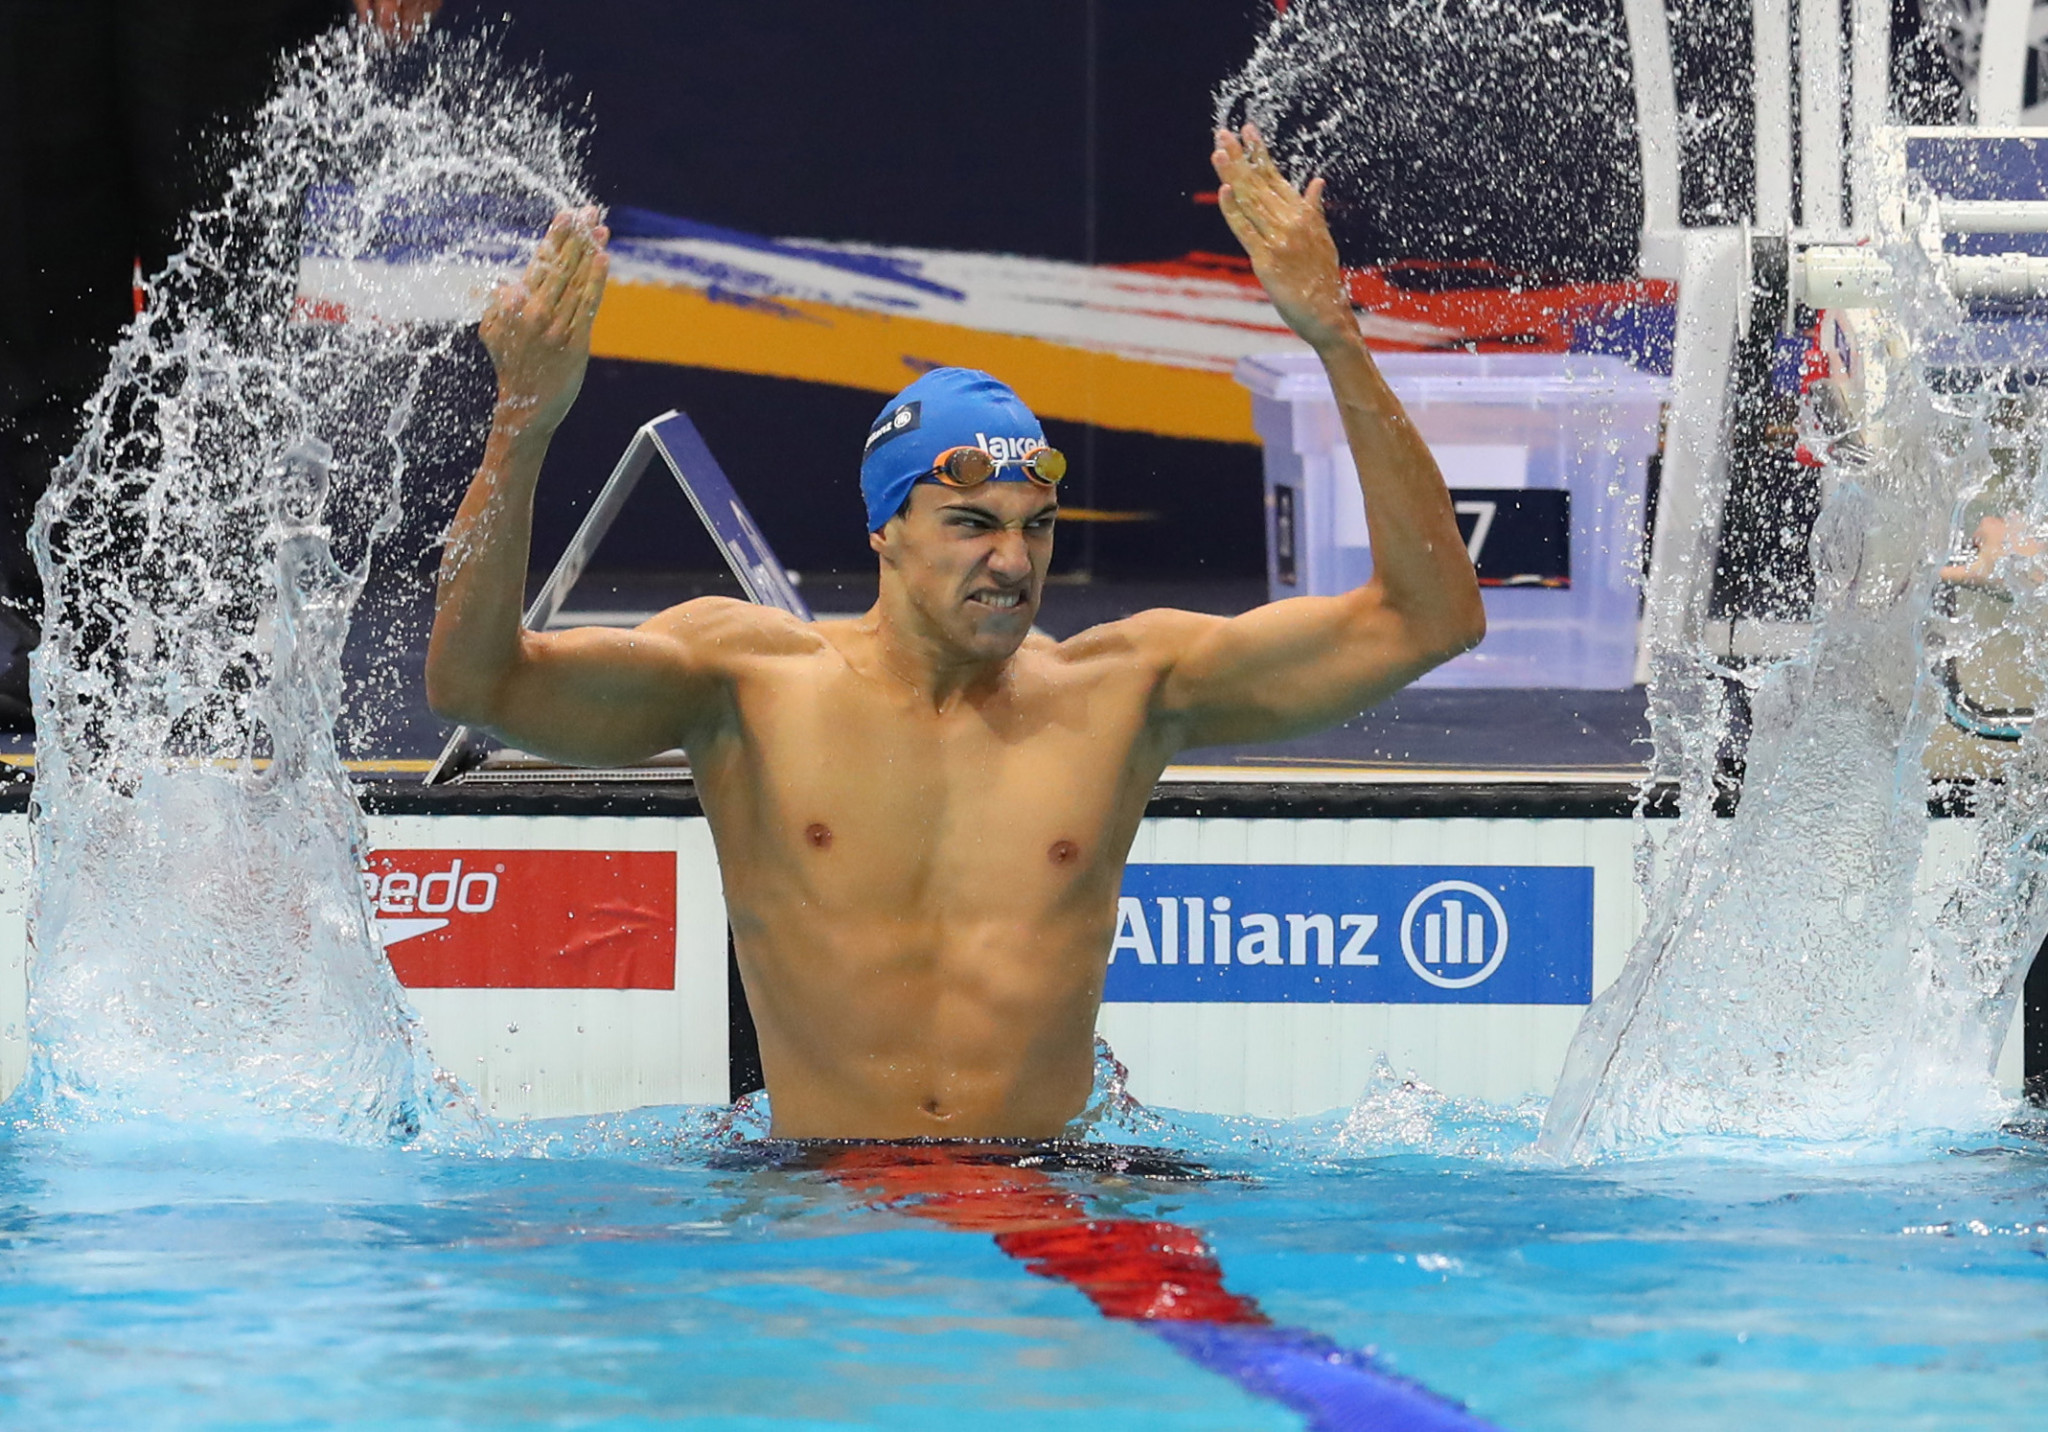 Simone Barlaam of Italy continued his record-breaking form to secure his second title of the Championships ©Getty Images